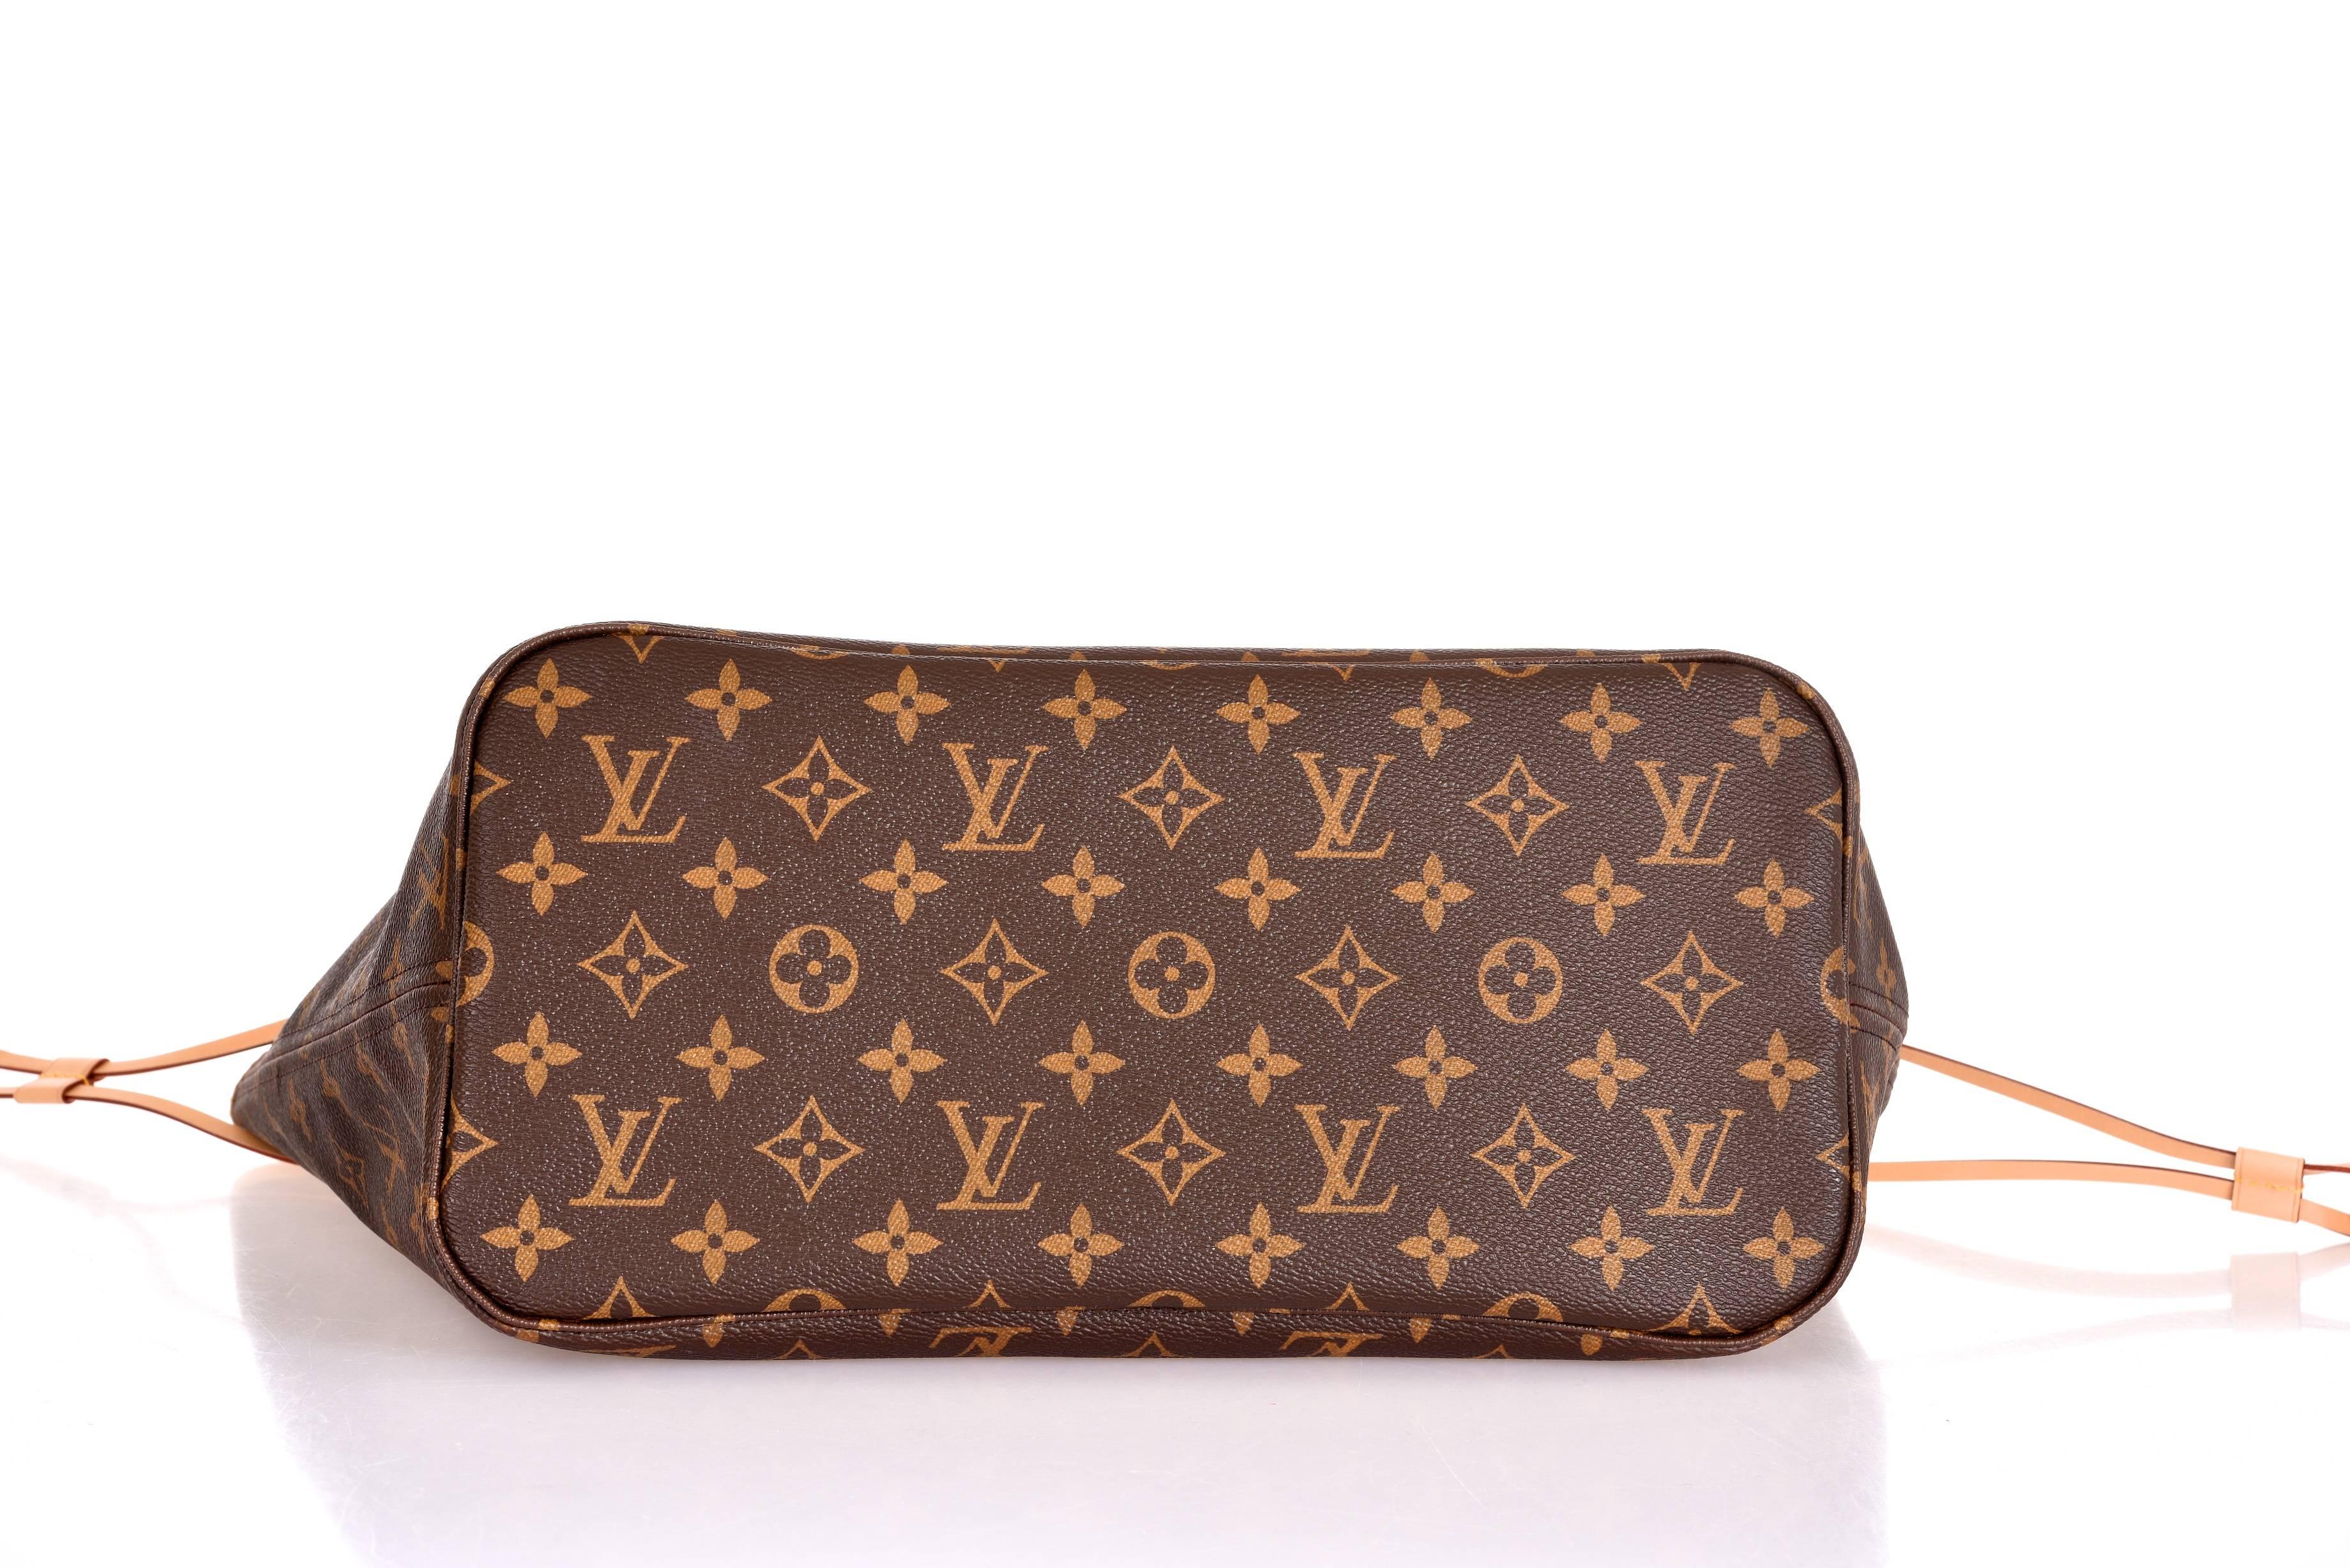 New Condition

Louis Vuitton released a slew of new ‘city’ Neverfull bags in the latest Volez, Voguez, Voyagez line. Available in the latest ‘Rose Ballerine‘ color, the cities currently featured for the line include:  Capri, Forte dei Marmi,